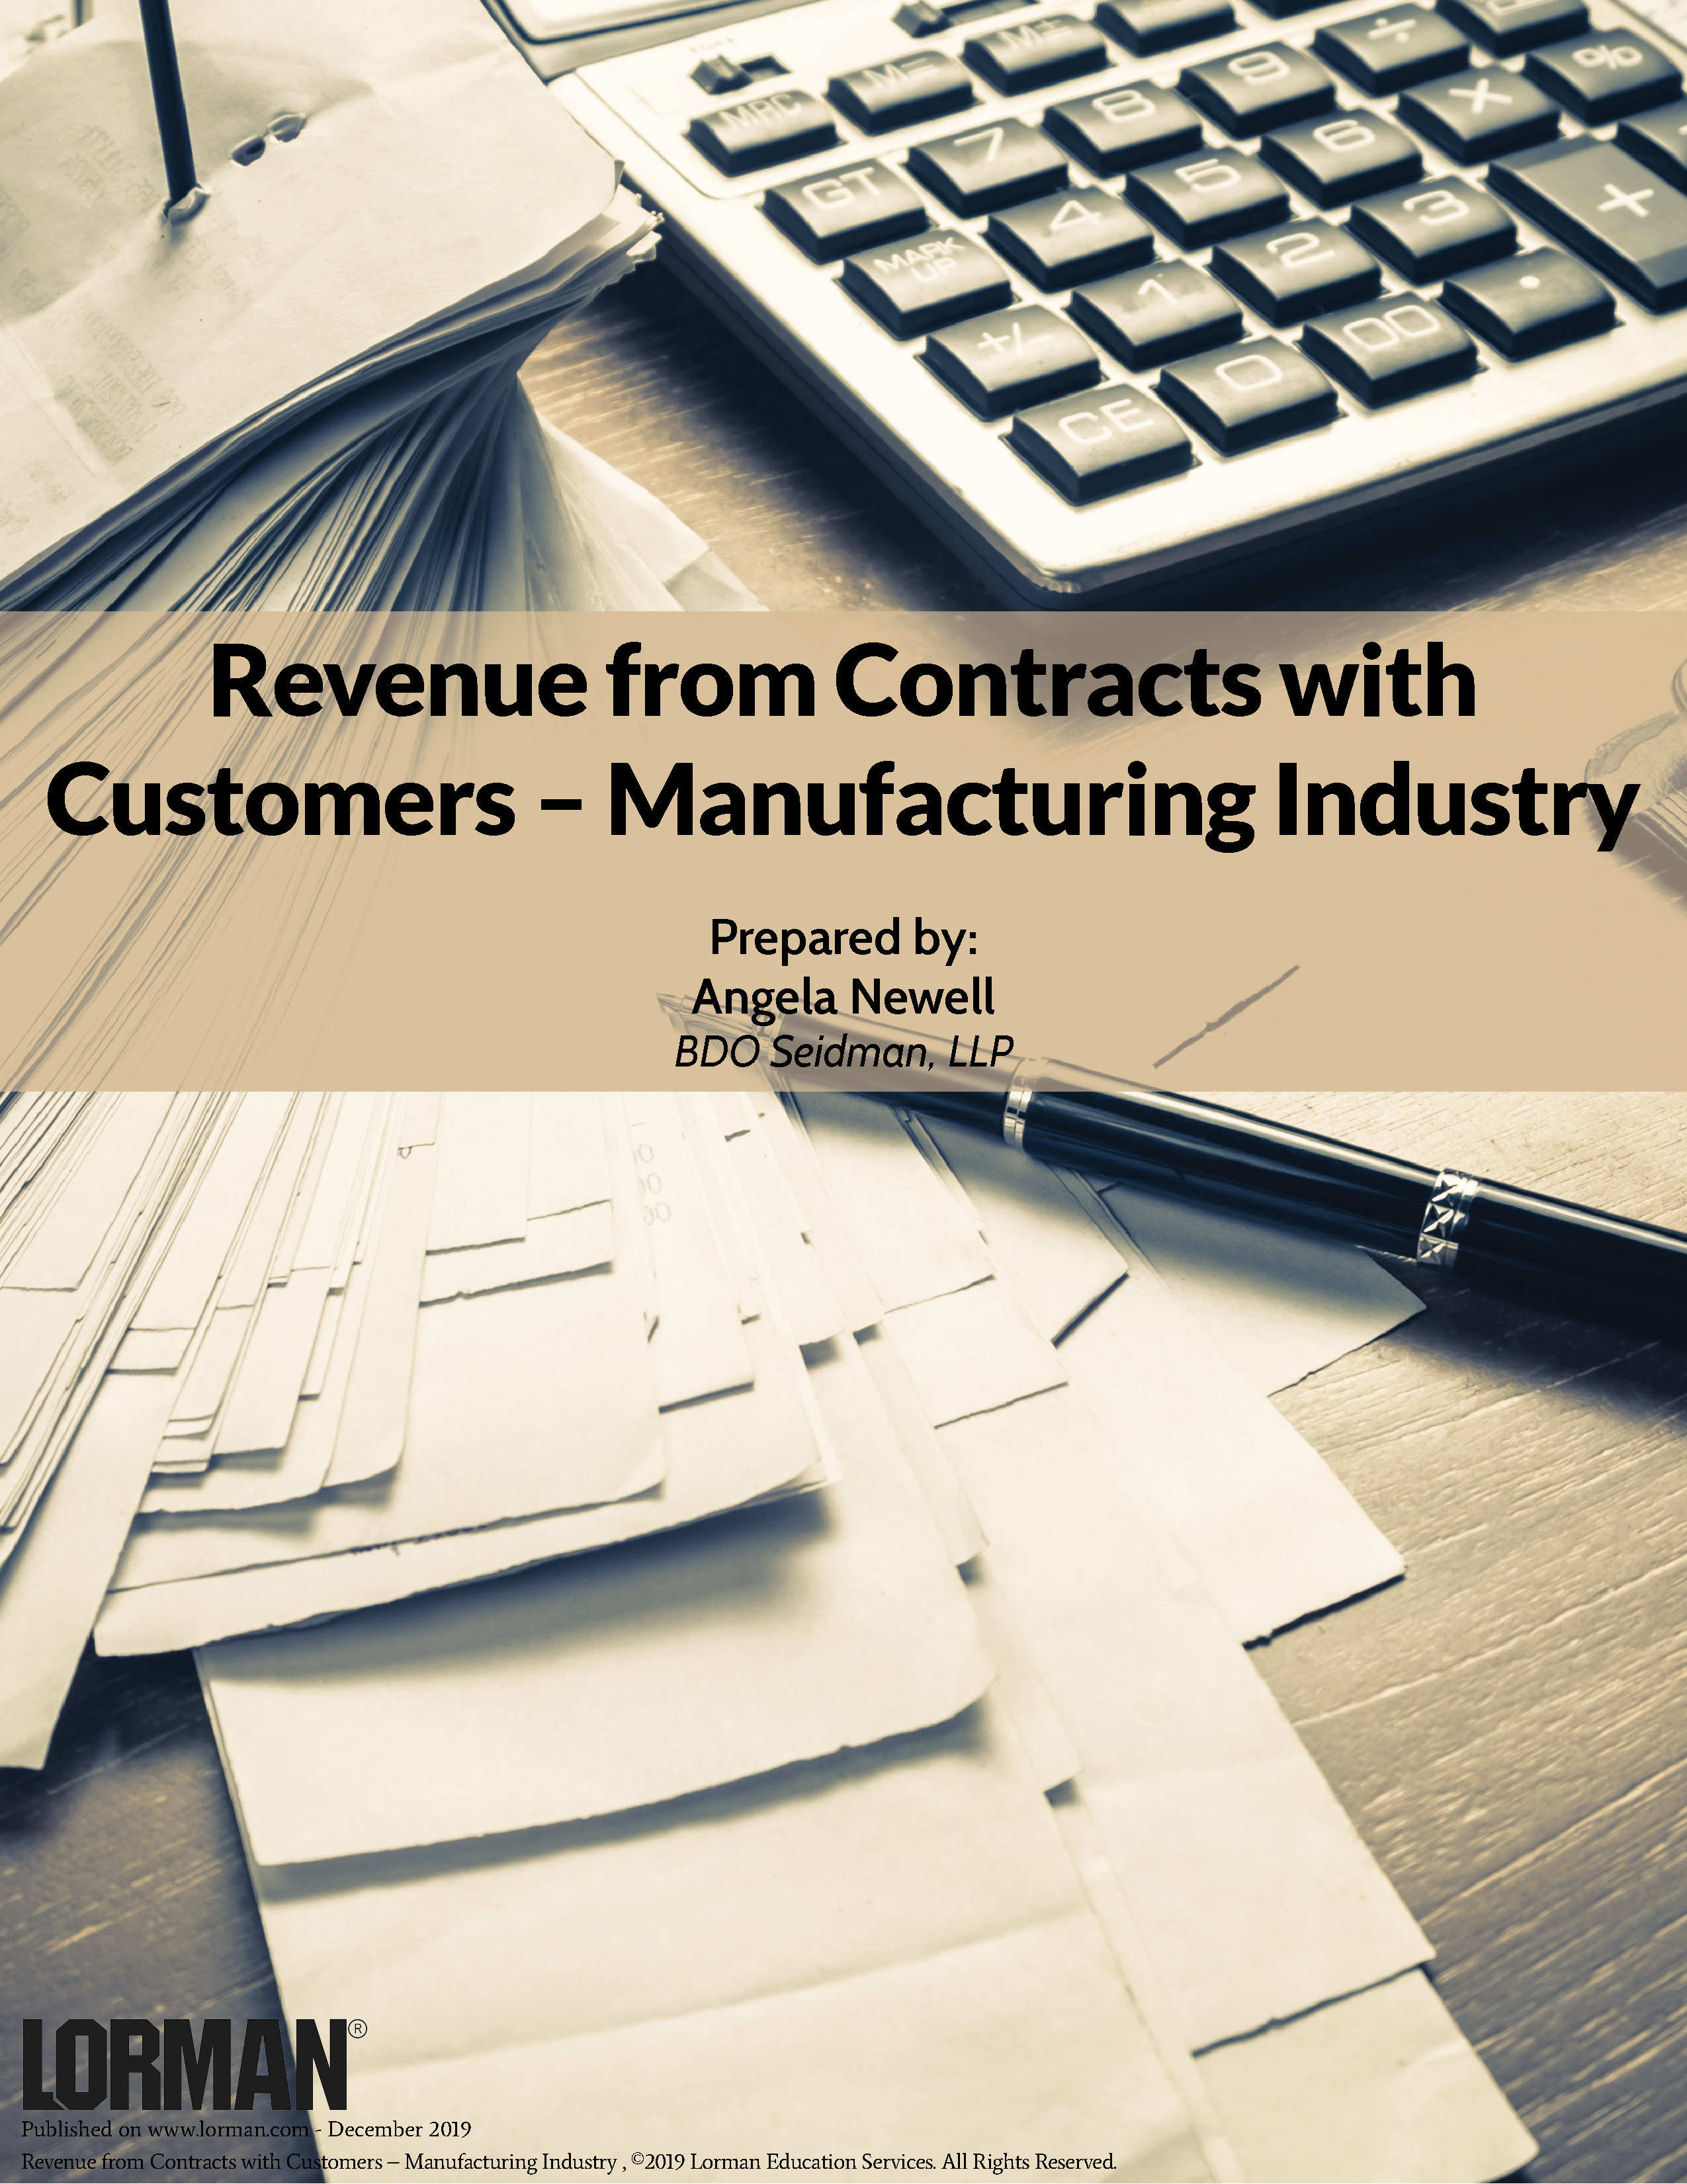 Revenue from Contracts with Customers - Manufacturing Industry